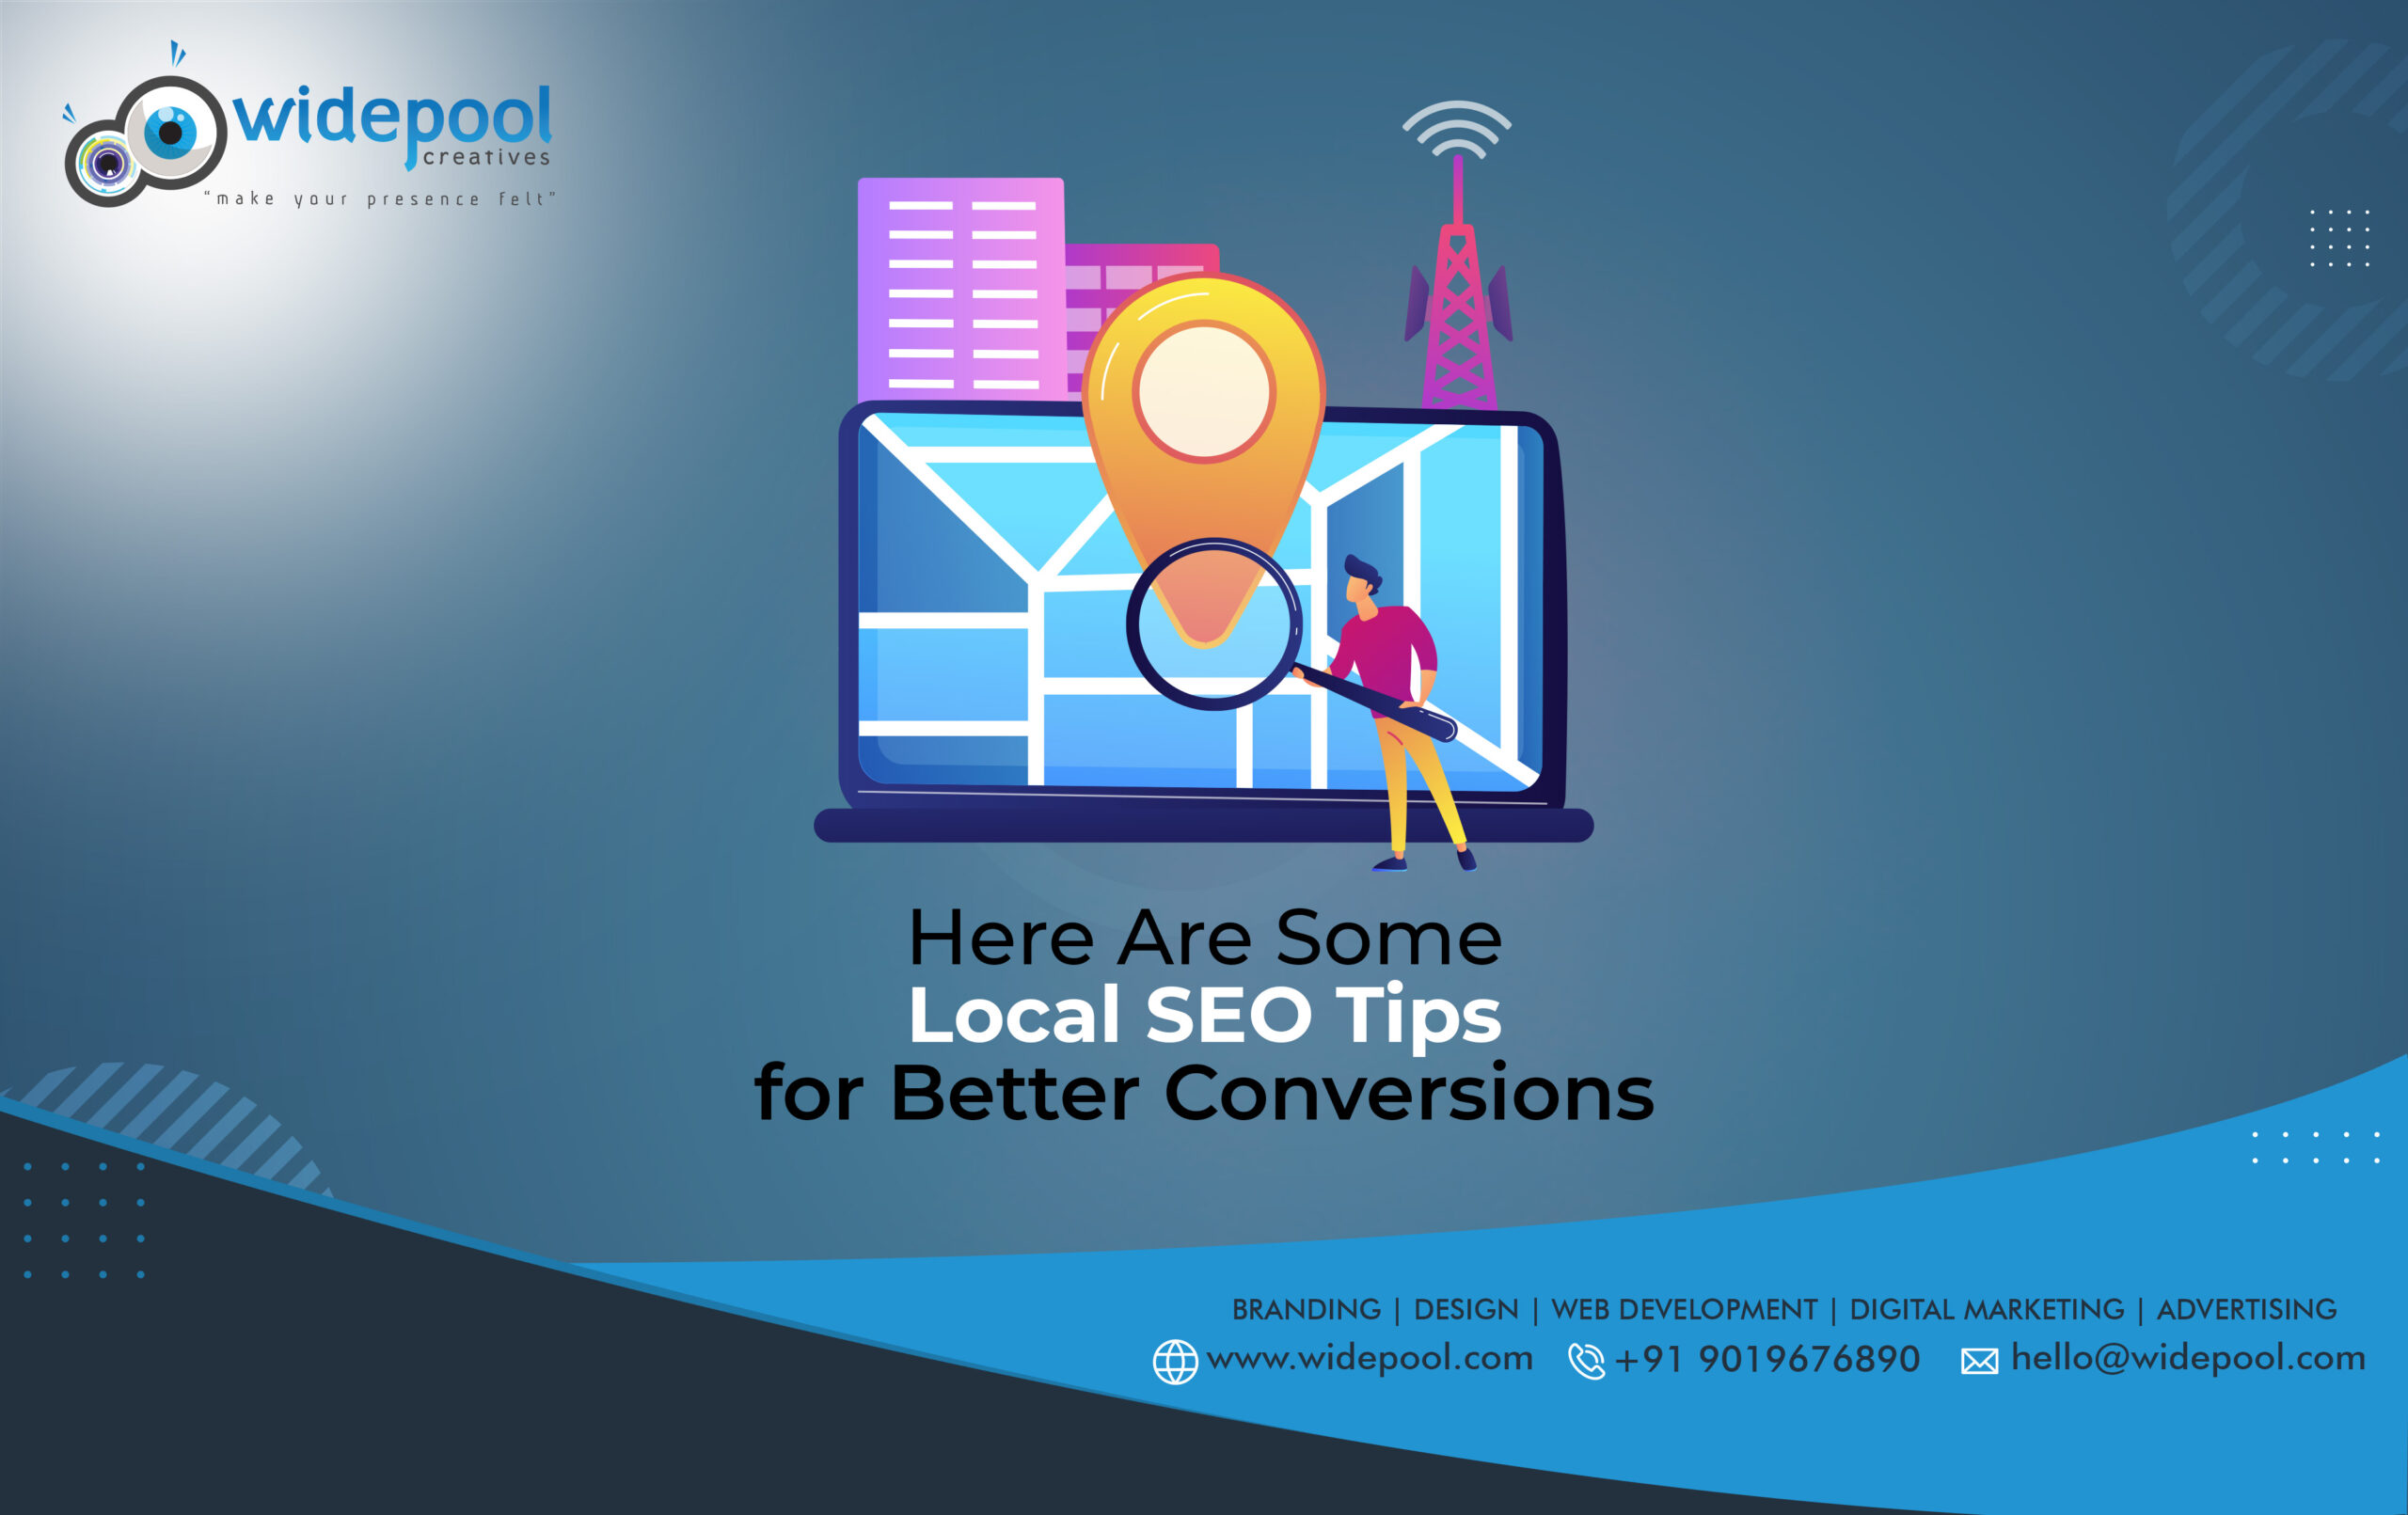 Here Are Some Local SEO Tips for Better Conversions